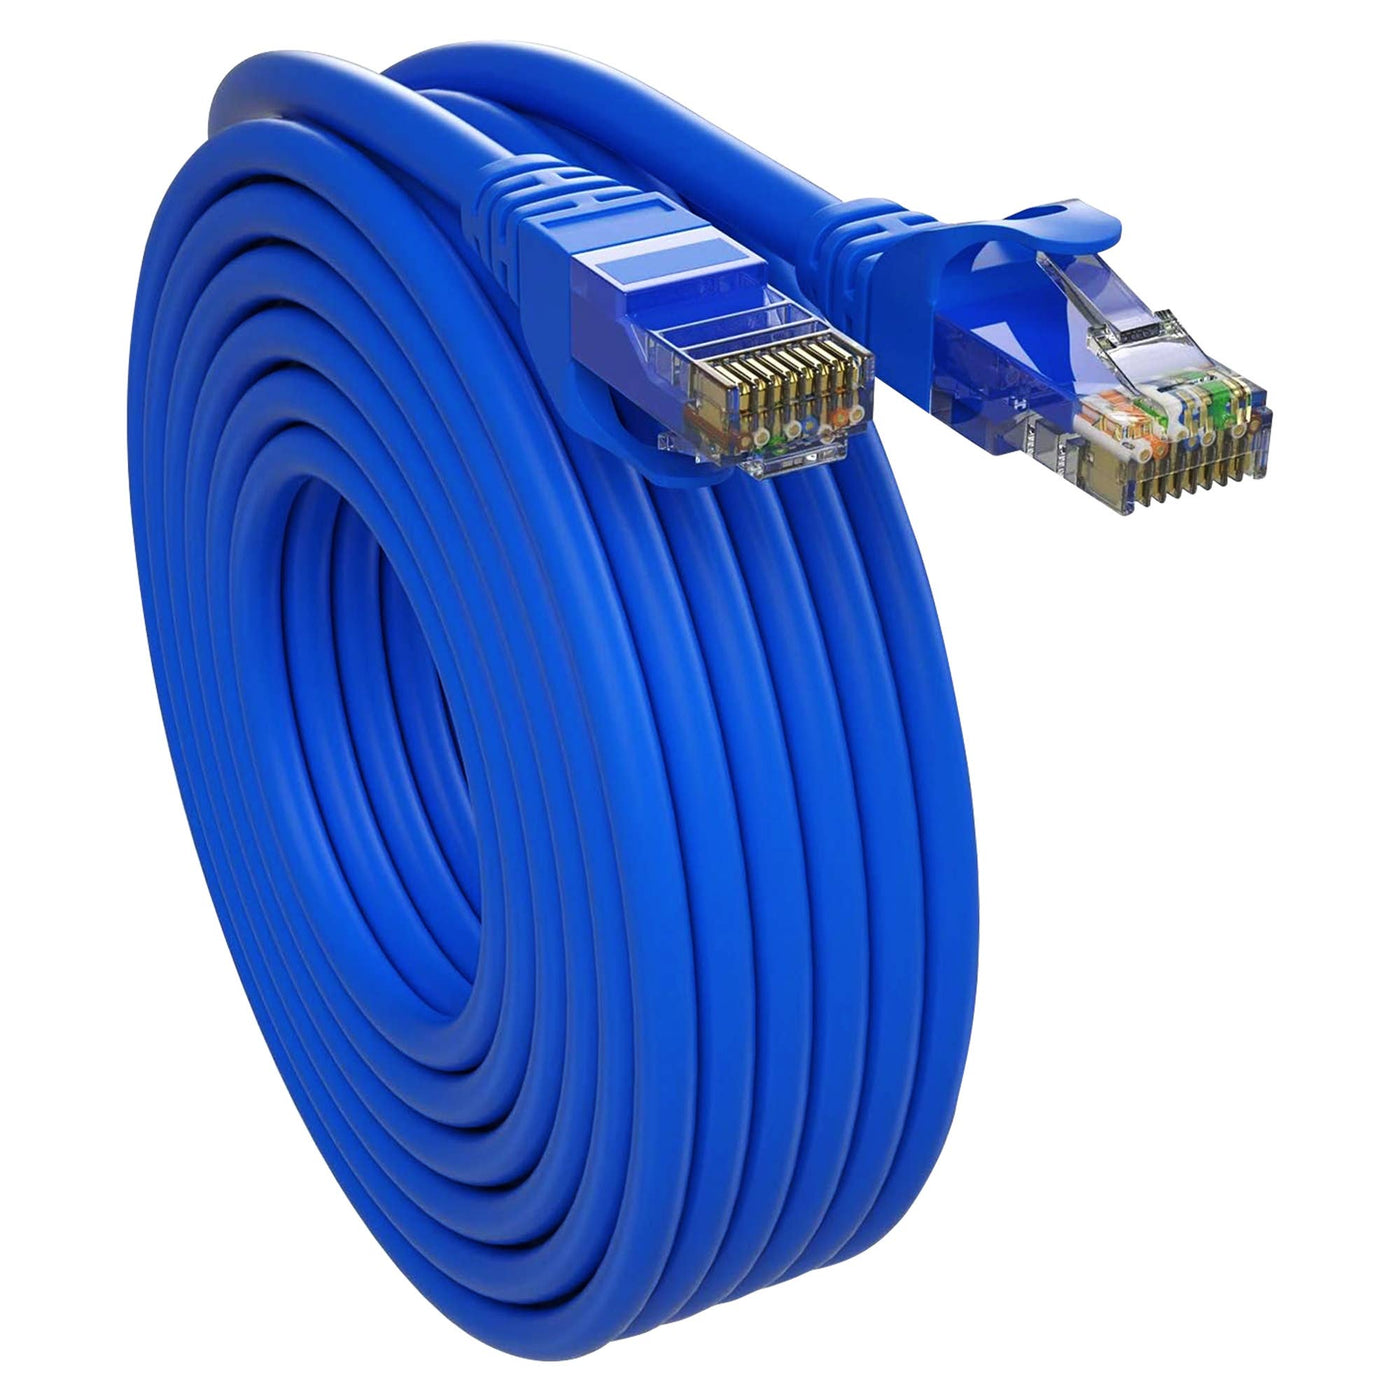 Cat6 Ethernet Cable 20ft 10Gbps Network Cord High-Speed LAN